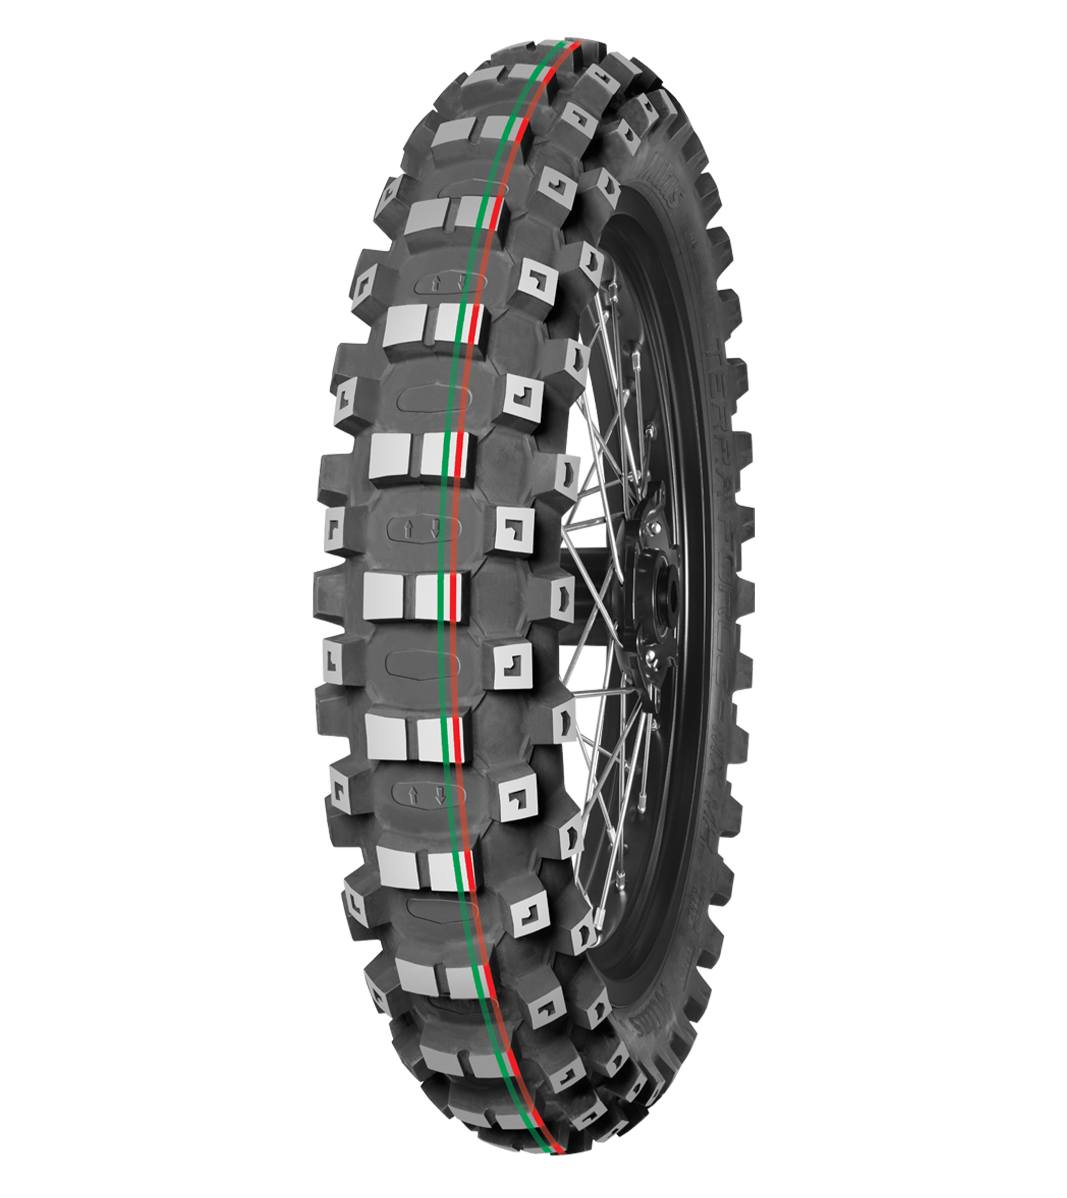 Mitas TERRA FORCE-MX MH 70/100-10 Motocross Competition Off-Road MEDIUM TO HARD 41J Red &amp; Green Tube Rear Tire, 226151, 70/100-10, Motocross, Motocross Competition, Off-Road, Rear, Terra Force, Terra Force-MX MH, Trail, Tires - Imported and distributed in North &amp; South America by Lindeco Genuine Powersports - Premier Powersports Equipment and Accessories for Motorcycle Enthusiasts, Professional Riders and Dealers.